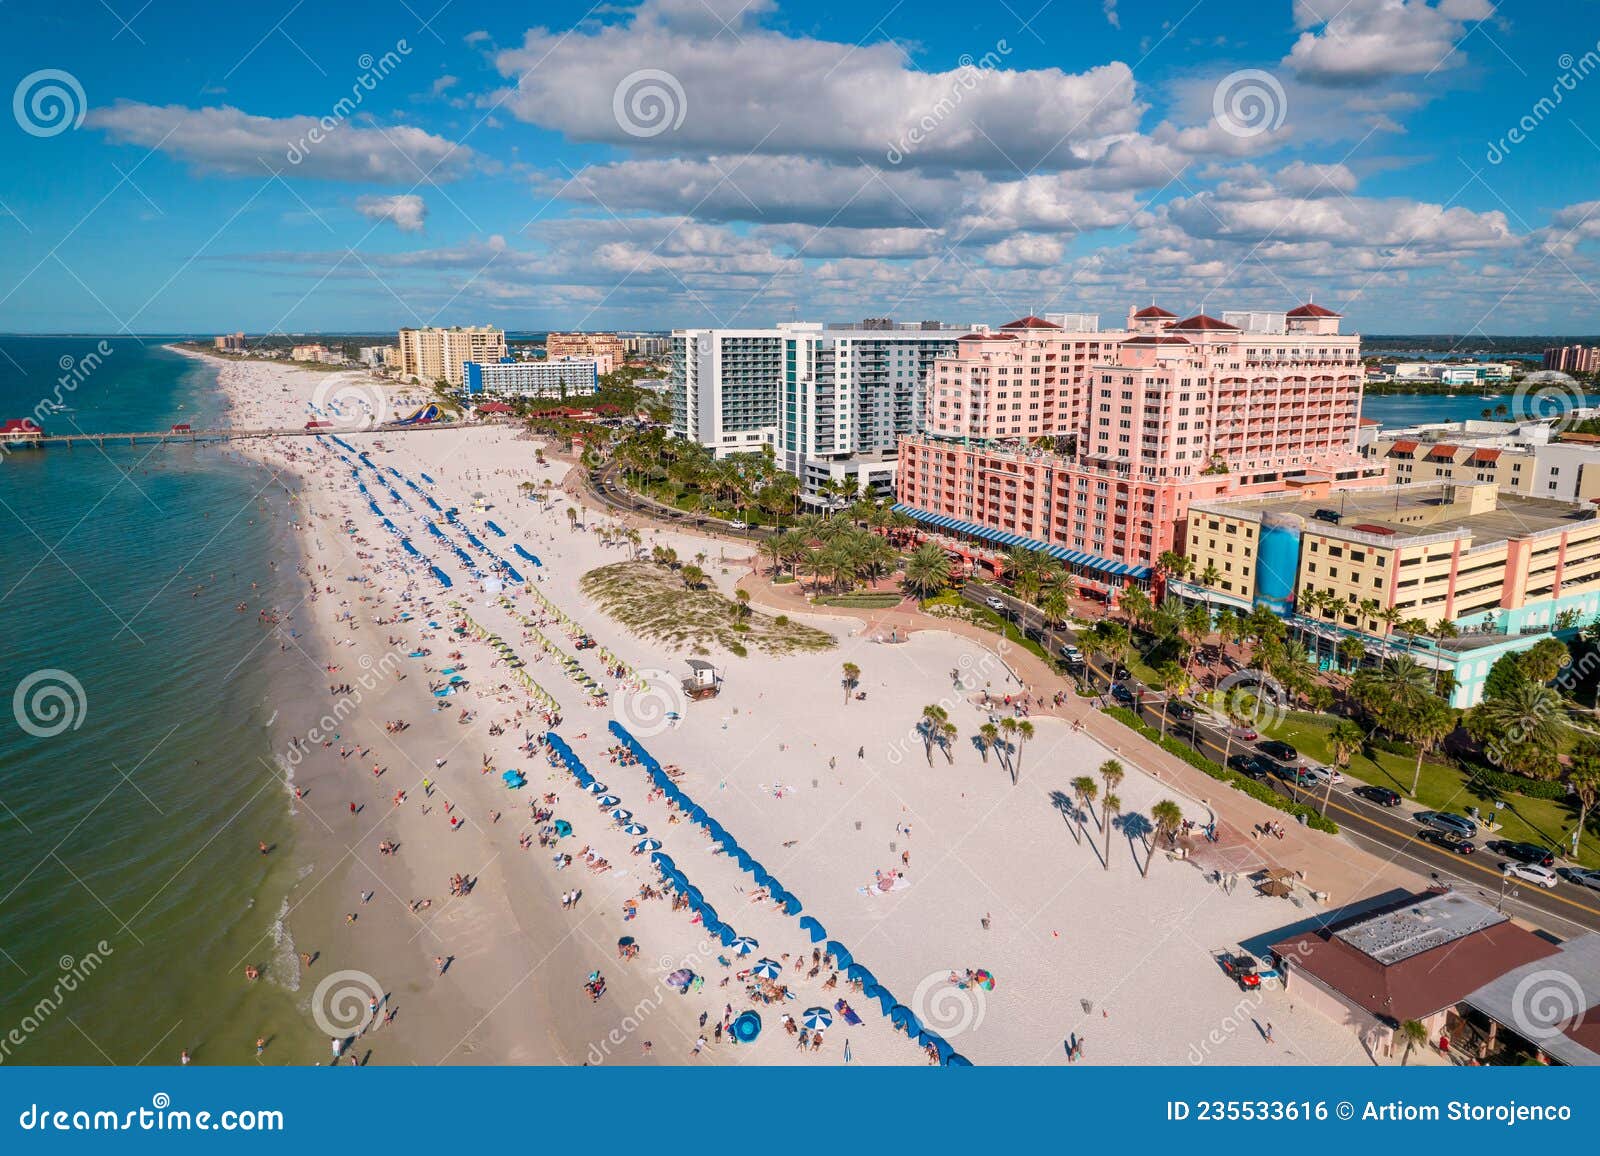 panorama of city clearwater beach fl. summer vacations in florida. beautiful view on hotels and resorts on island.